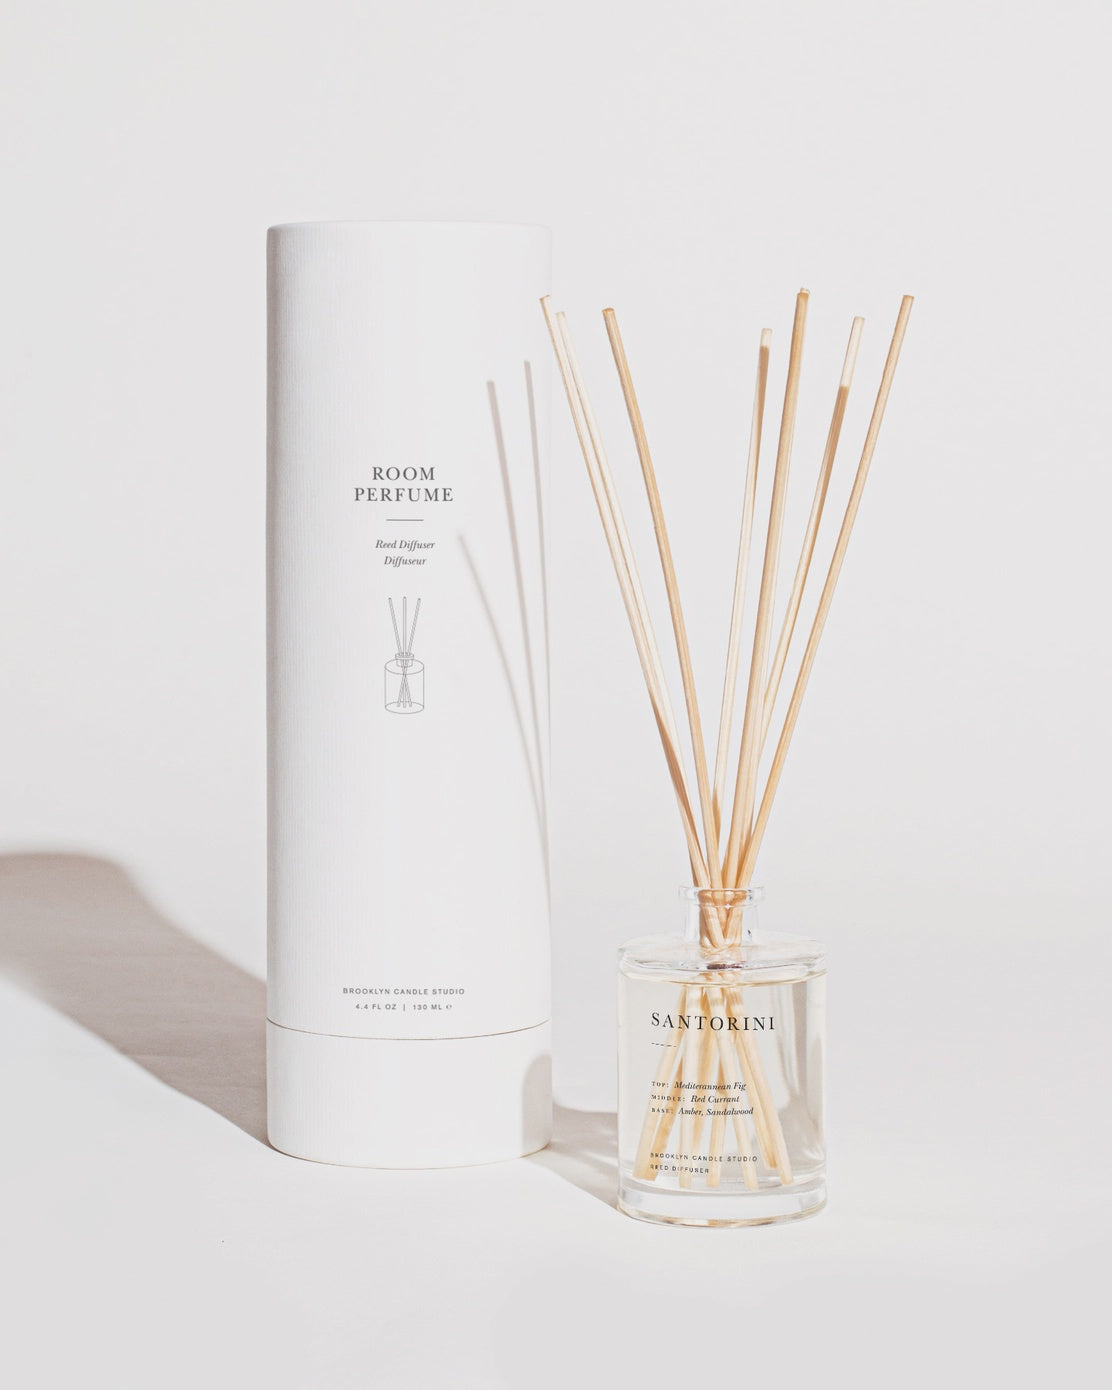 The Santorini Reed Diffuser by Brooklyn Candle Studio